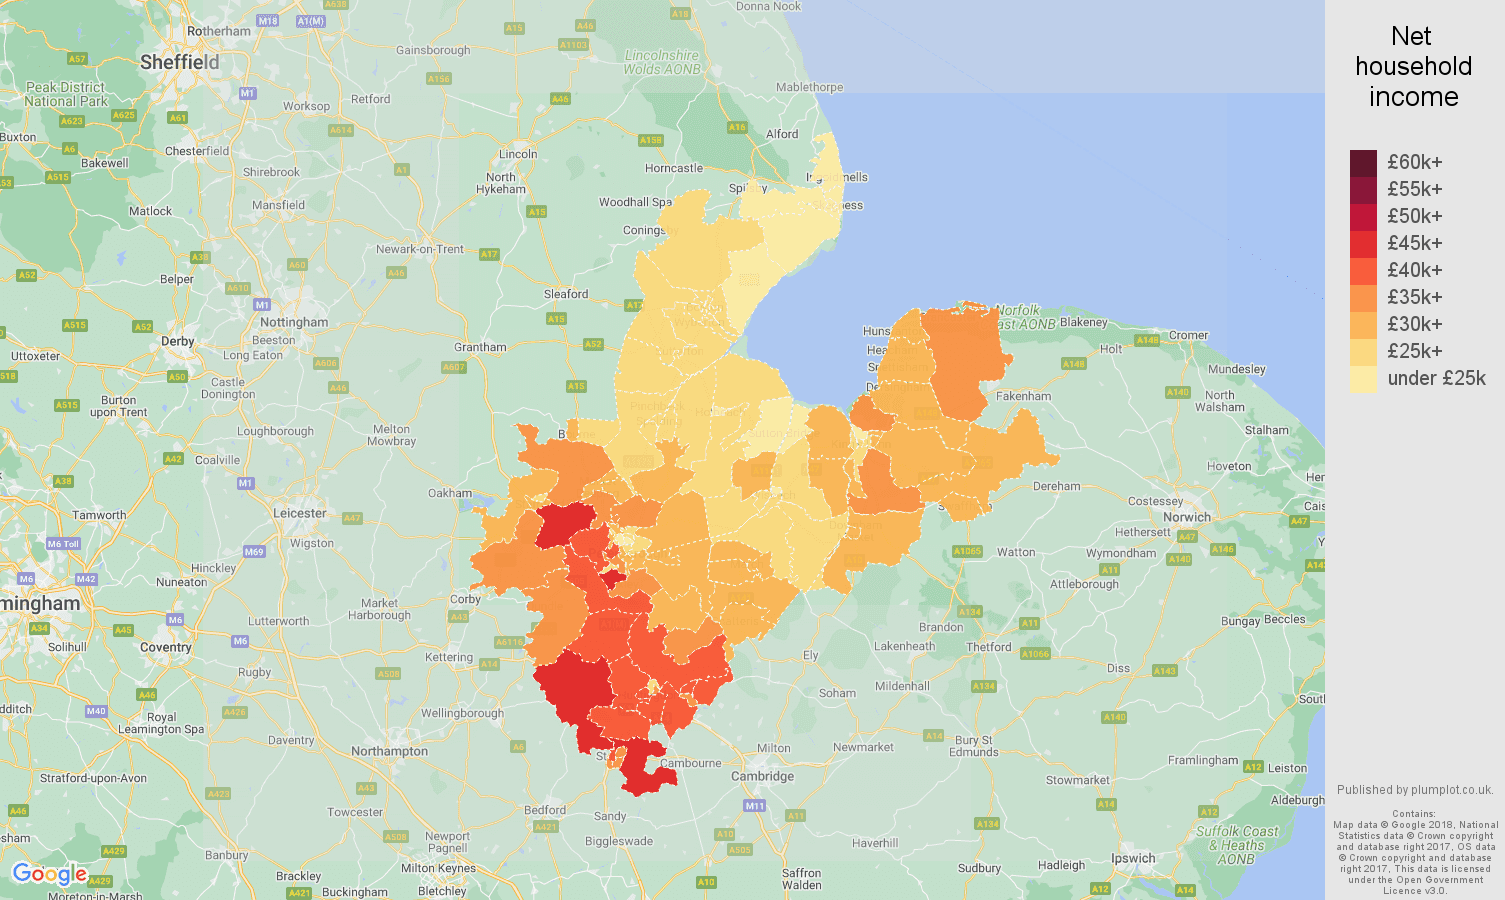 Peterborough net household income map